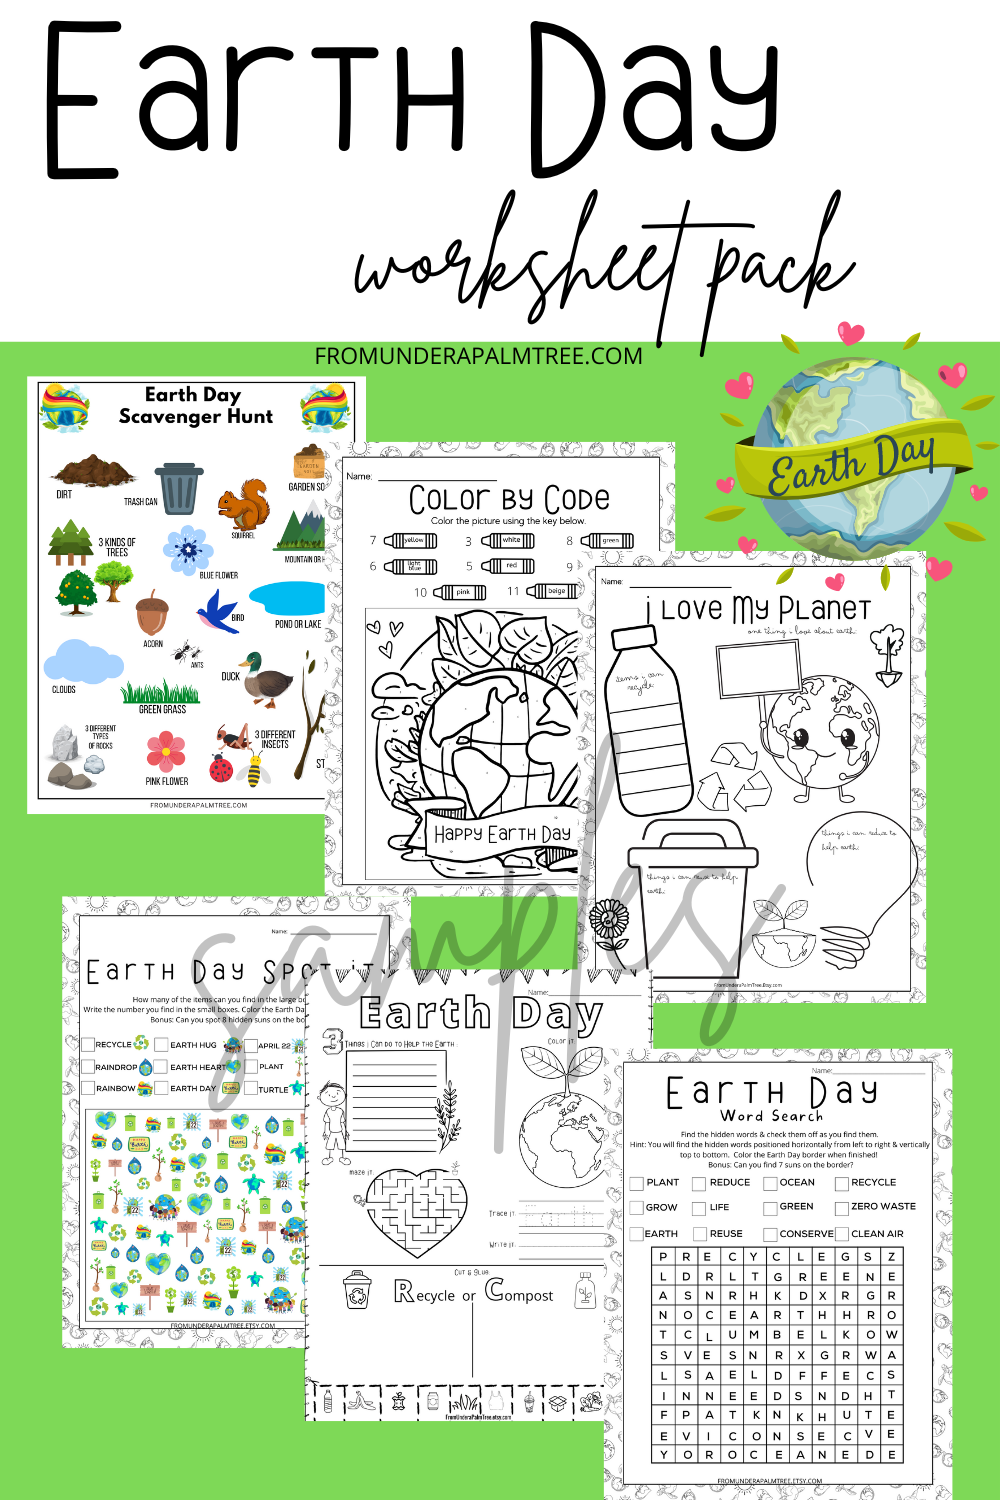 earth day | earth day worksheet | earth day printables | earth day kids activities | earth day actviity | earth day activities | kids printables | kids worksheets | earht day word search | earth day games | earth day scavenger hunt | scavenger hunt for kids | earth day spot it | earth day prompted writing worksheet | earth day coloring sheet | earth day coloring | earth day color by code | earth day color by numbers | etsy shop | etsy printables | digital downloads | 